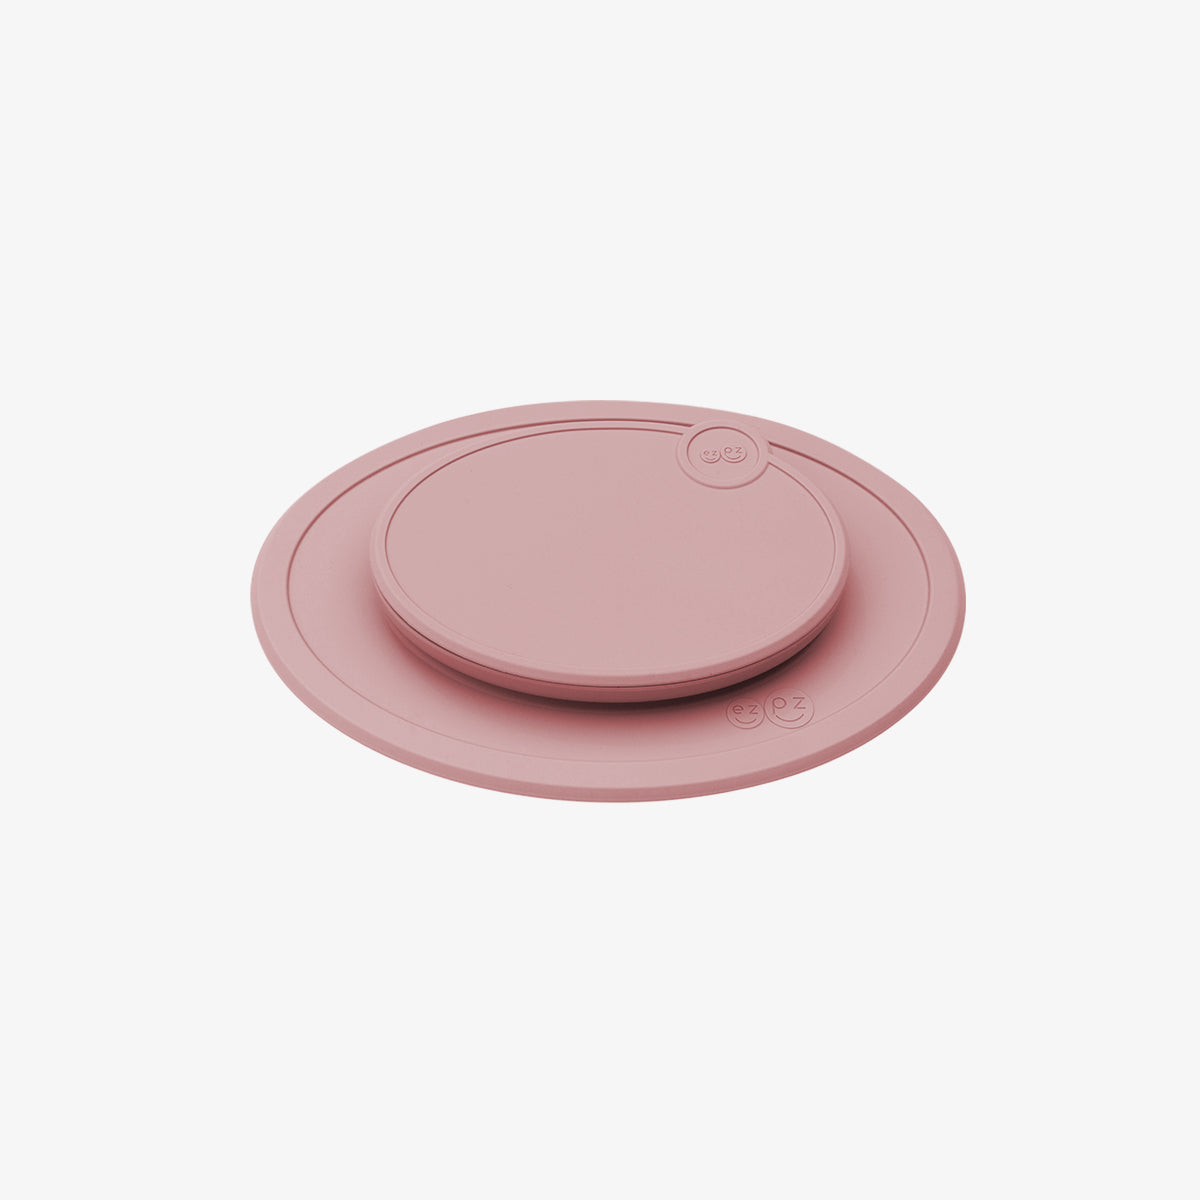 Mini Mat Lid in Blush / Storage Lids for the Mini Mat by ezpz / Silicone Lid for Toddler Plate